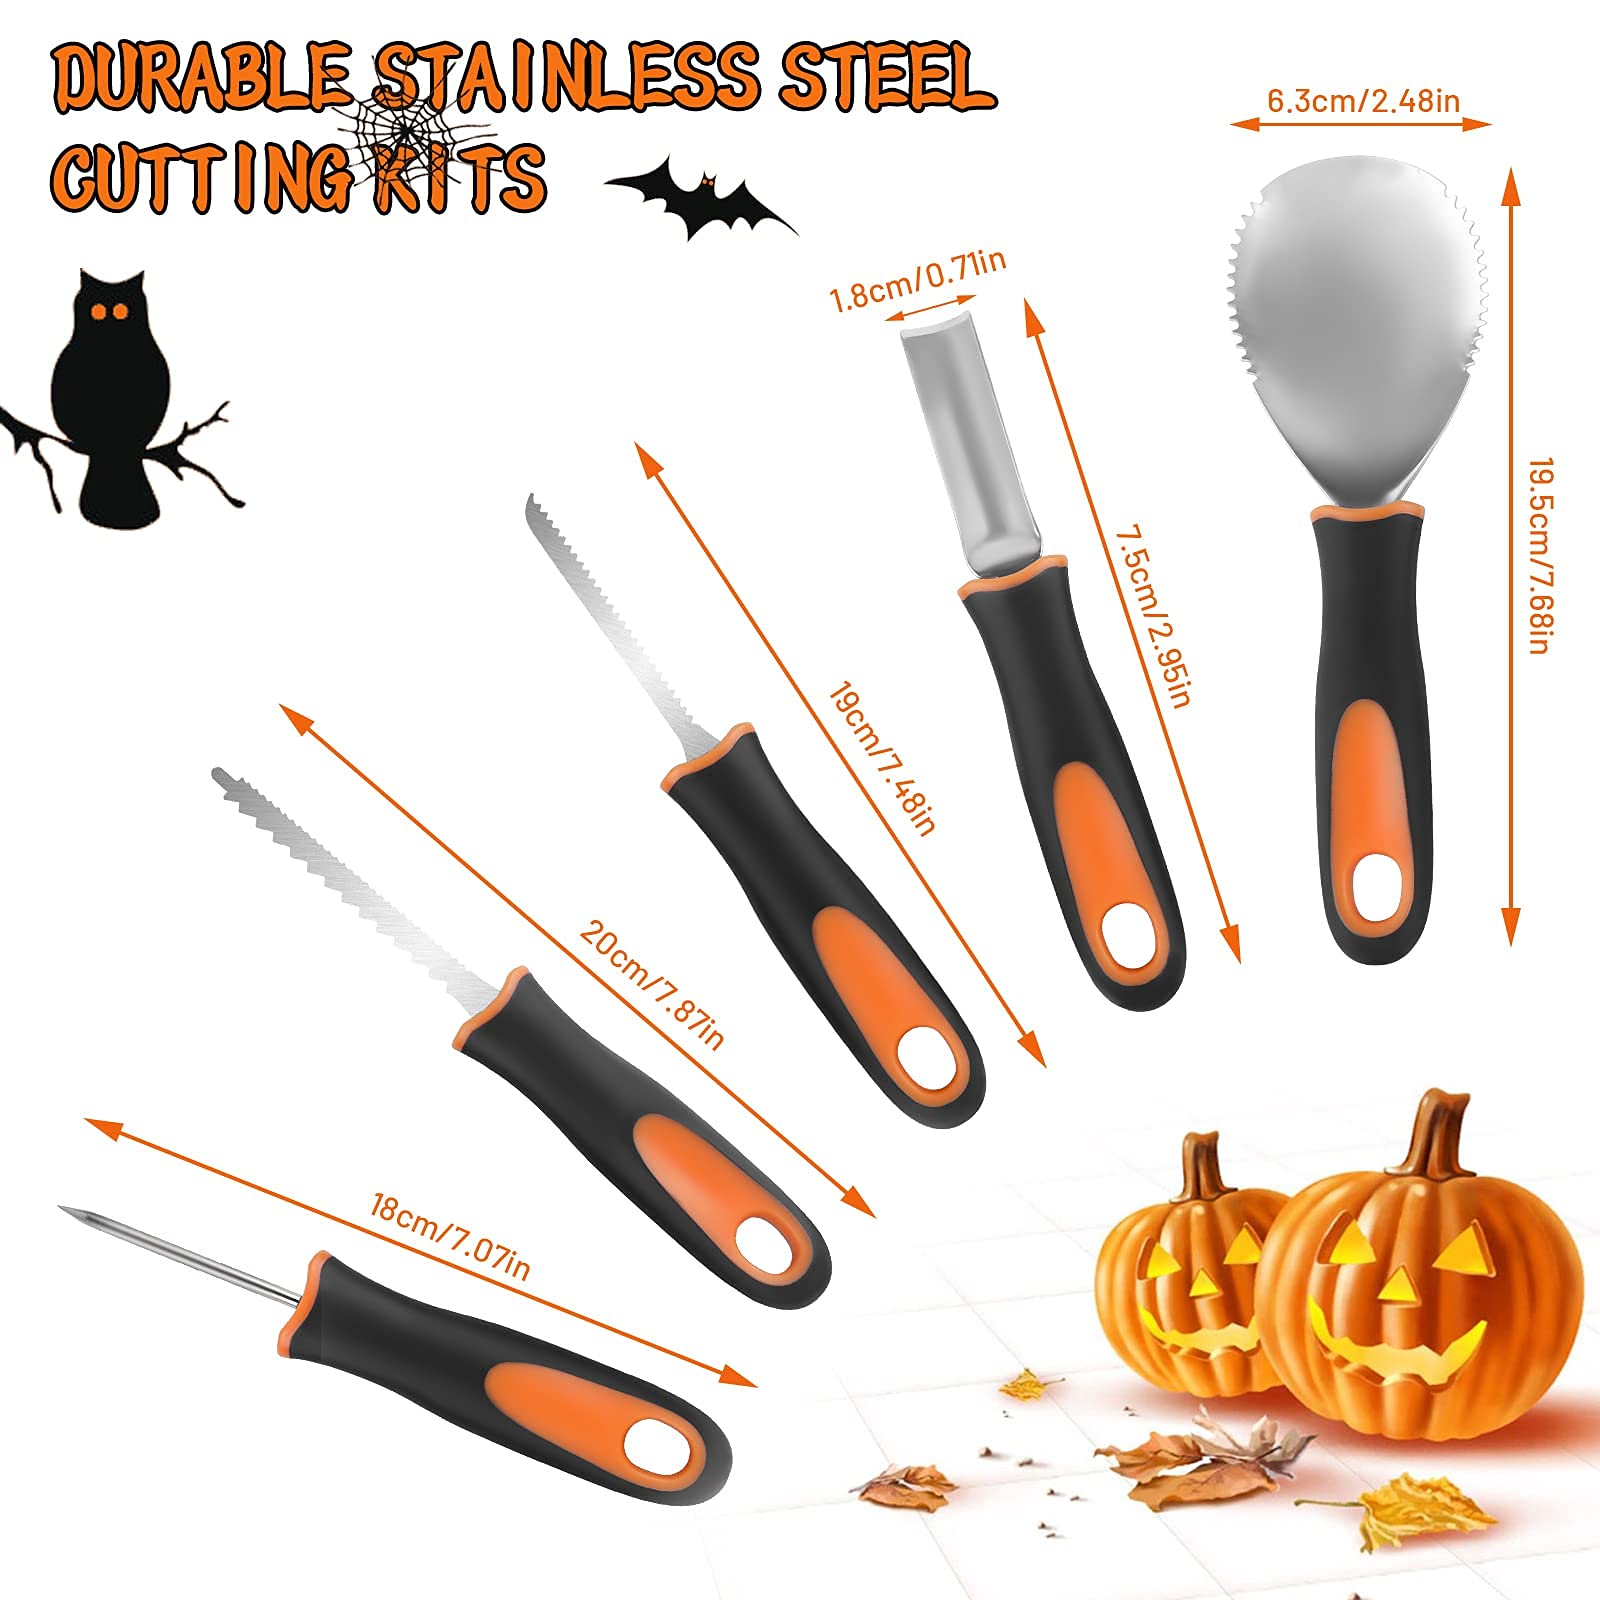 Samyoung Pumpkin Carving Kit Tools, 13 Piece Heavy Duty Stainless Steel Pumpkin Carving Set with Light Strips, Pumpkin Cutting Supplies Tools Kit with Carrying Case